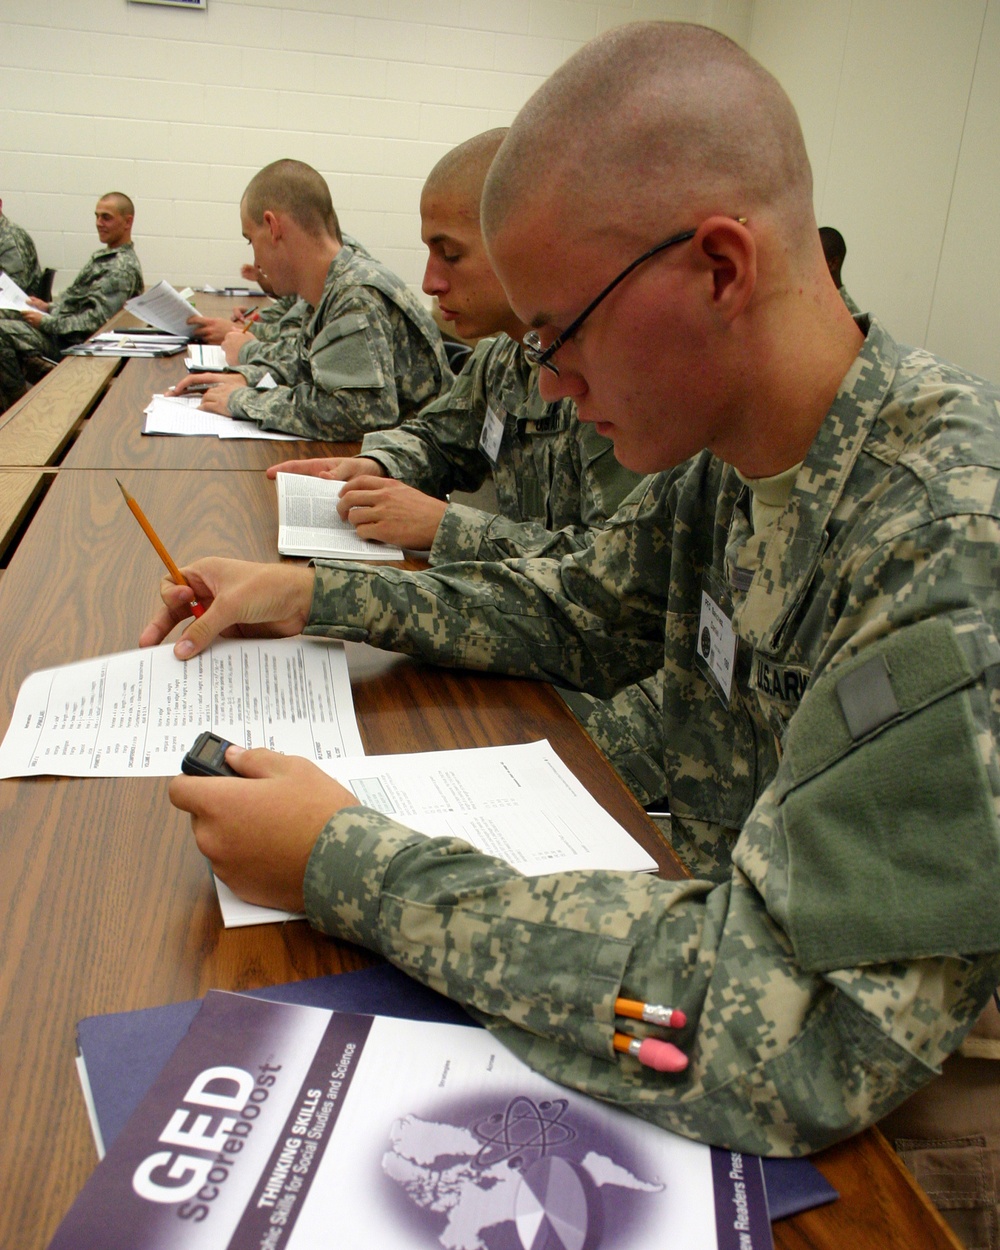 Pvt. Sanchez Prepares for the GED Examination